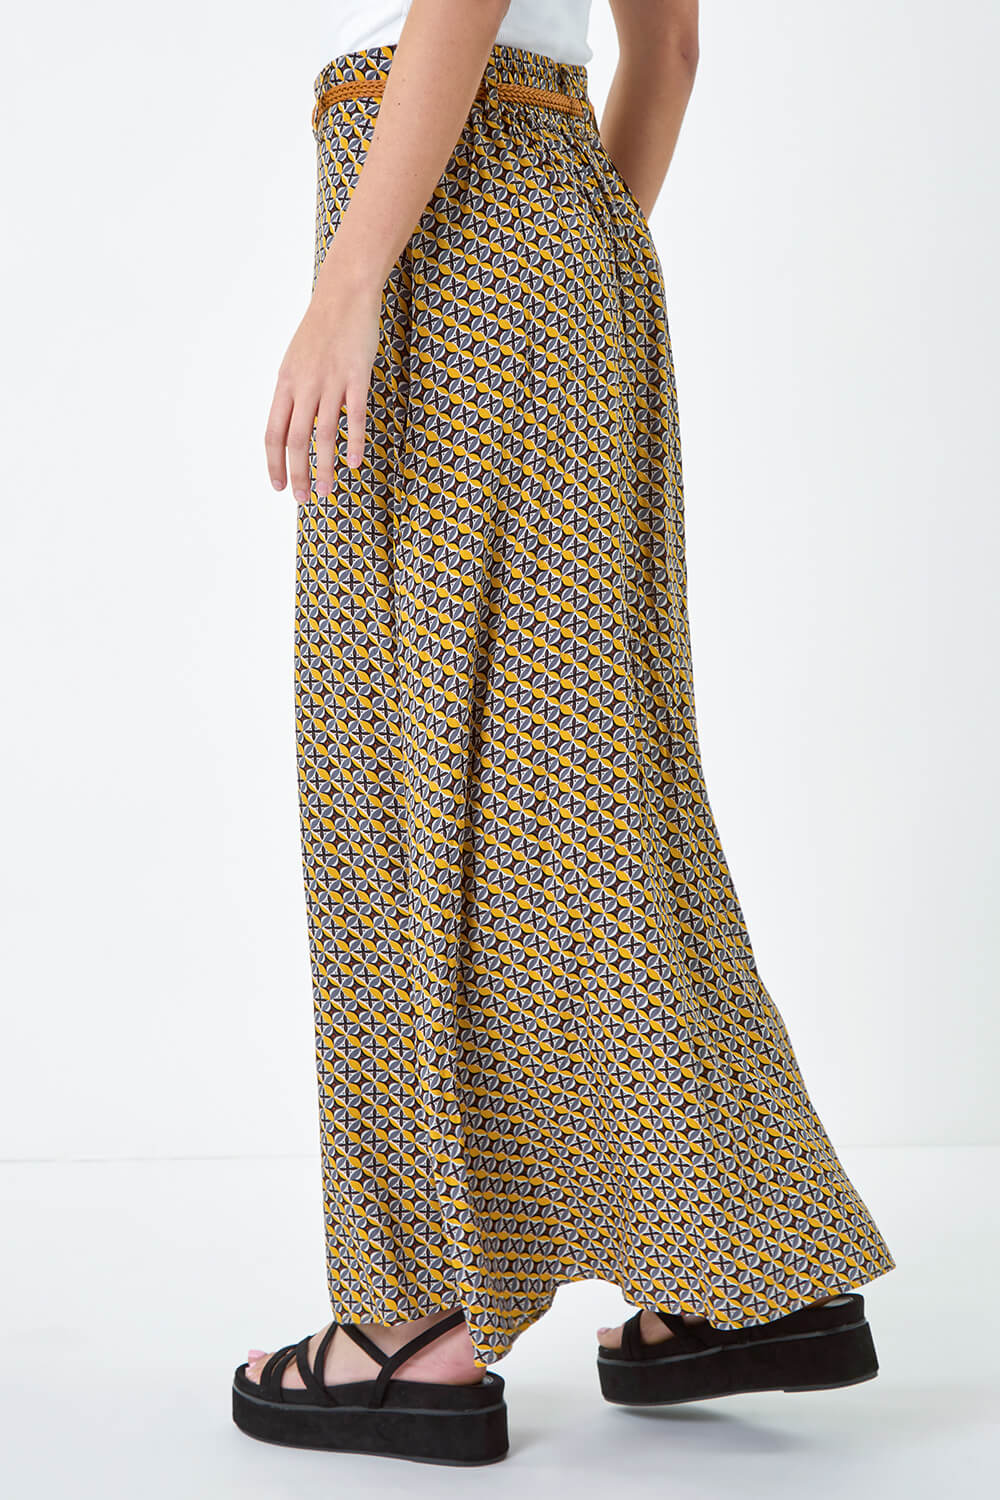 Yellow Floral Print Belted Maxi Skirt, Image 3 of 5